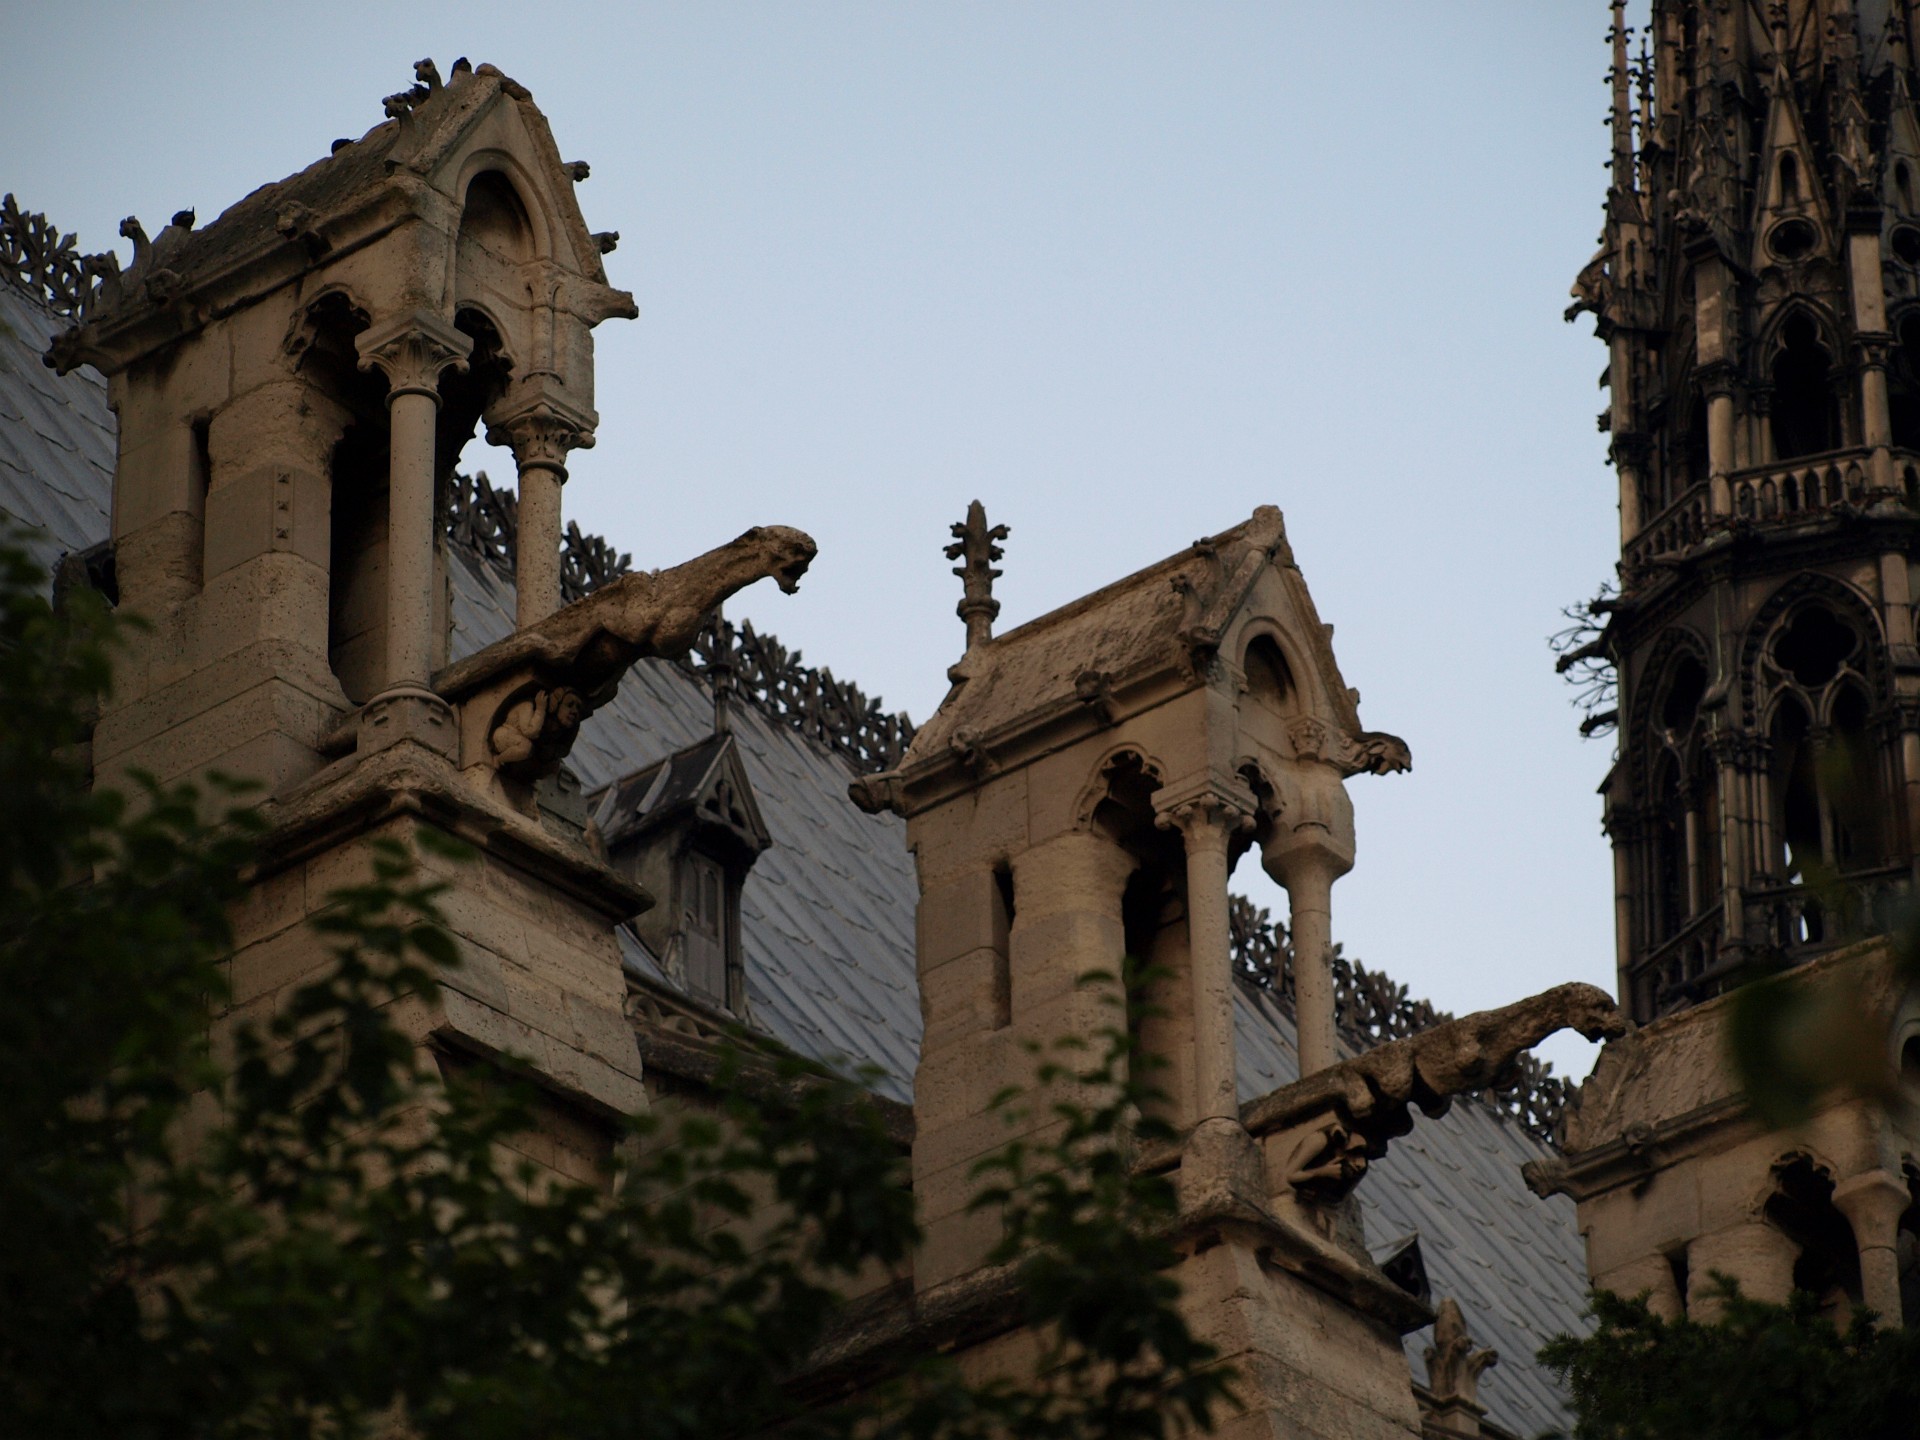 Gargoyles Leaping From Their Houses